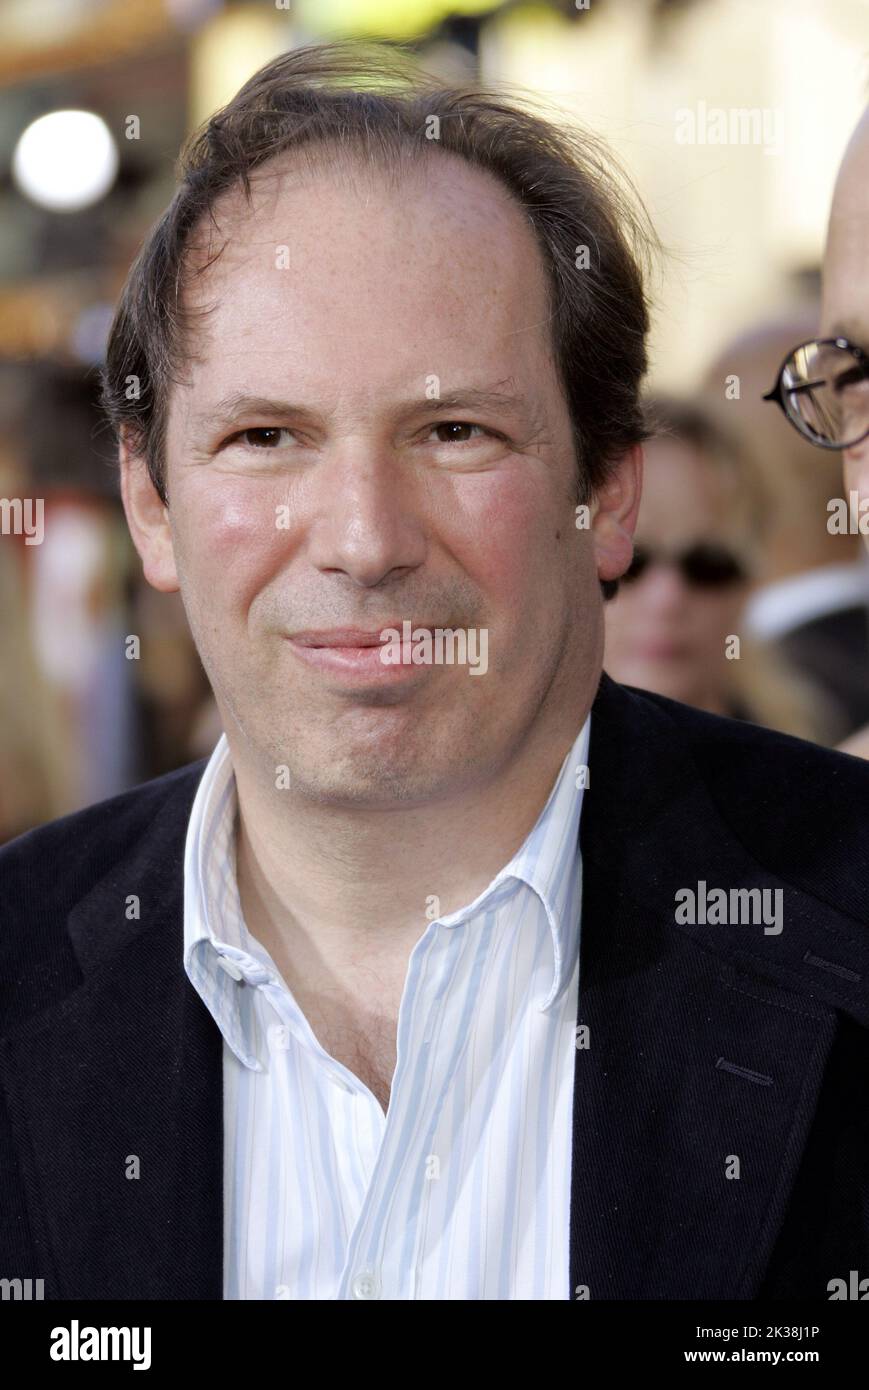 HANS ZIMMER COMPOSER BATMAN BEGINS CHINESE THEATRE, HOLLYWOOD LOS ANGELES, USA 06/06/2005 LAM51627 Stock Photo